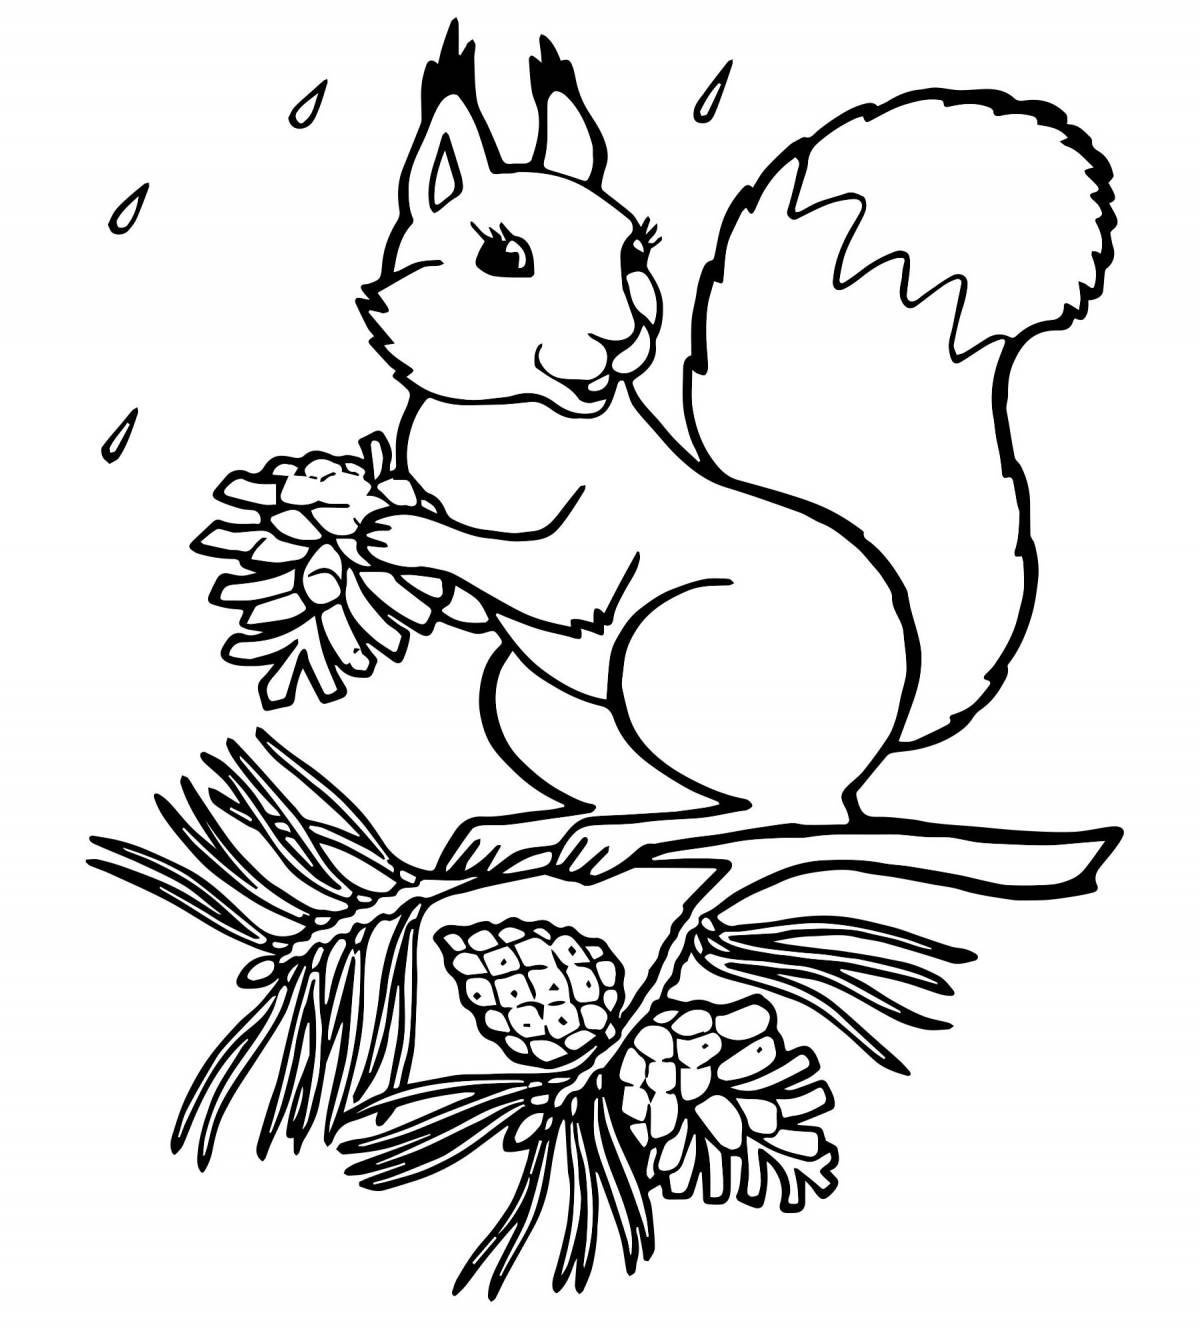 Coloring squirrel for children